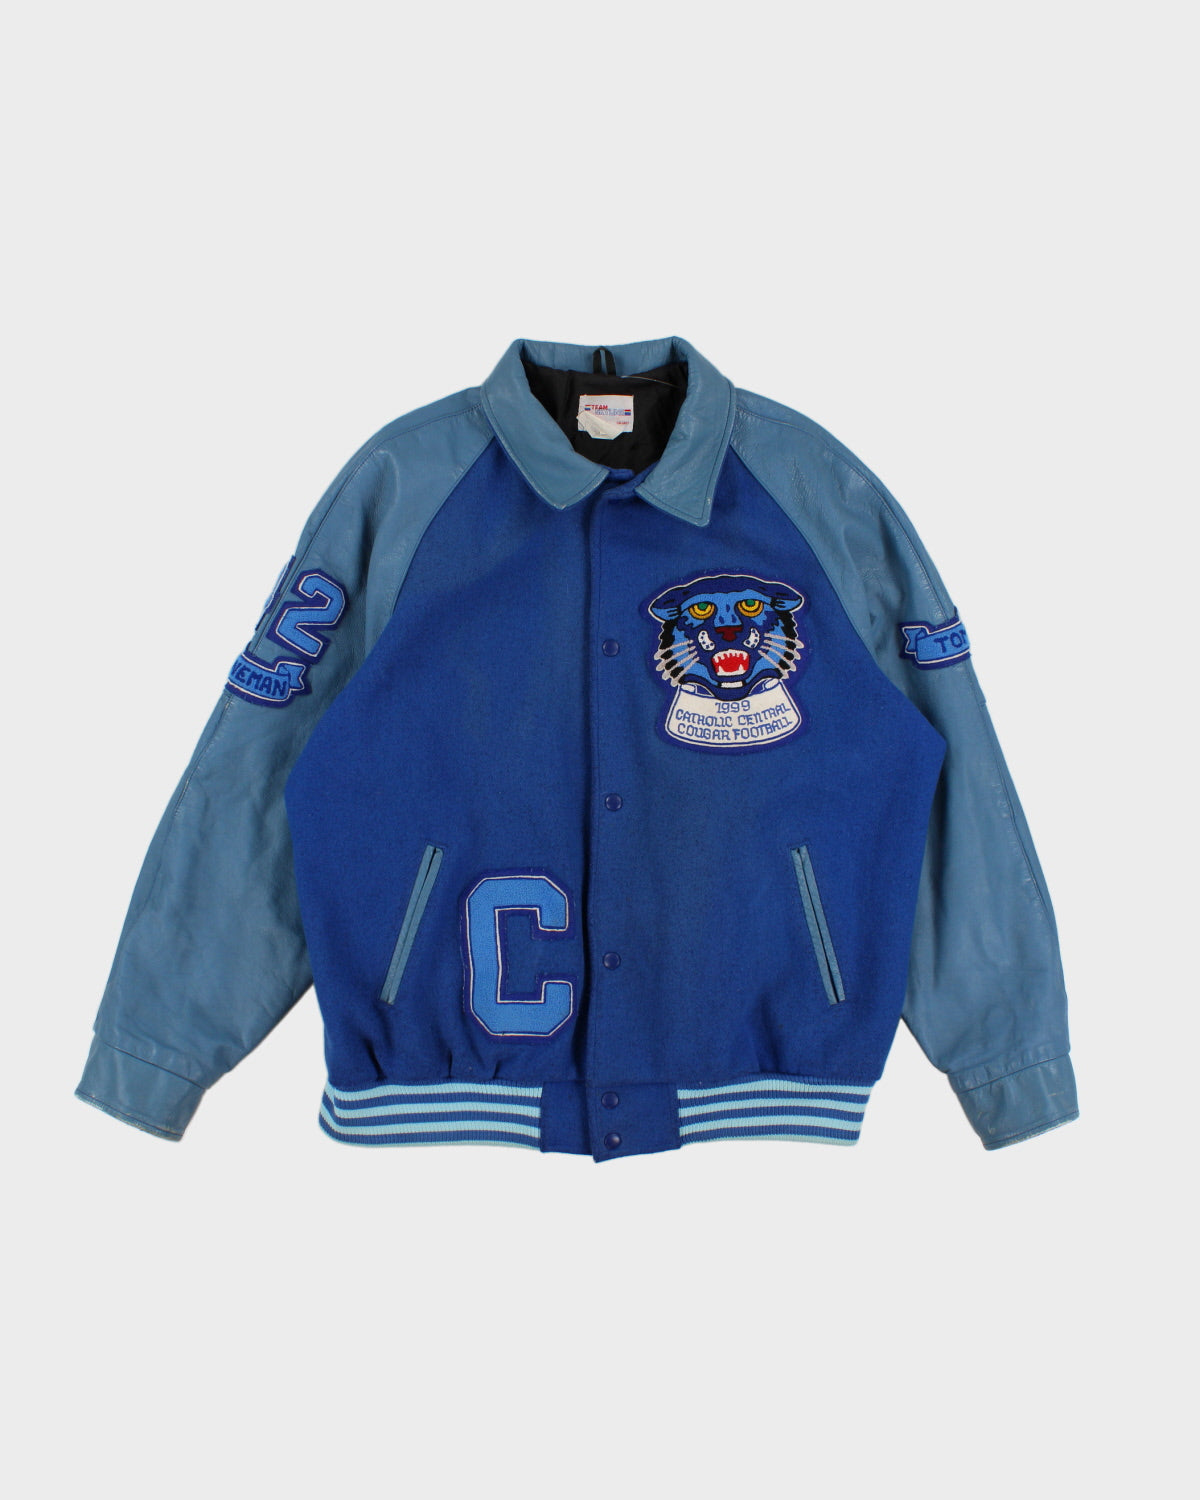 Mens Blue Leather and Wool Bomber Jacket with Tiger patch - L